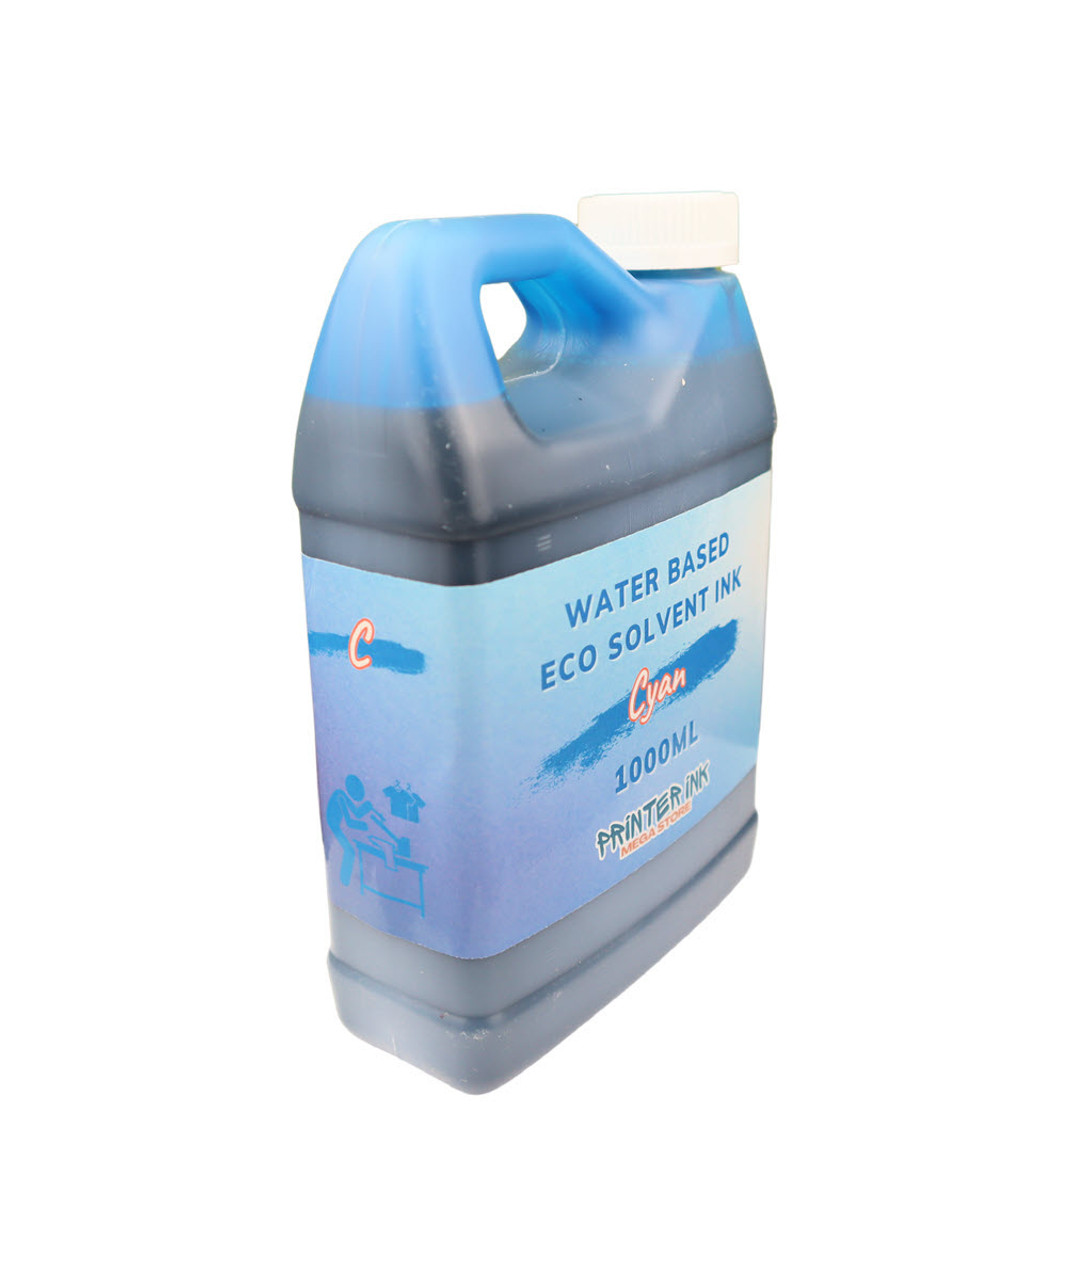 Cyan Water Based Eco Solvent Ink 1000ml Bottle for Epson SureColor T3270 T5270 T7270 Printers